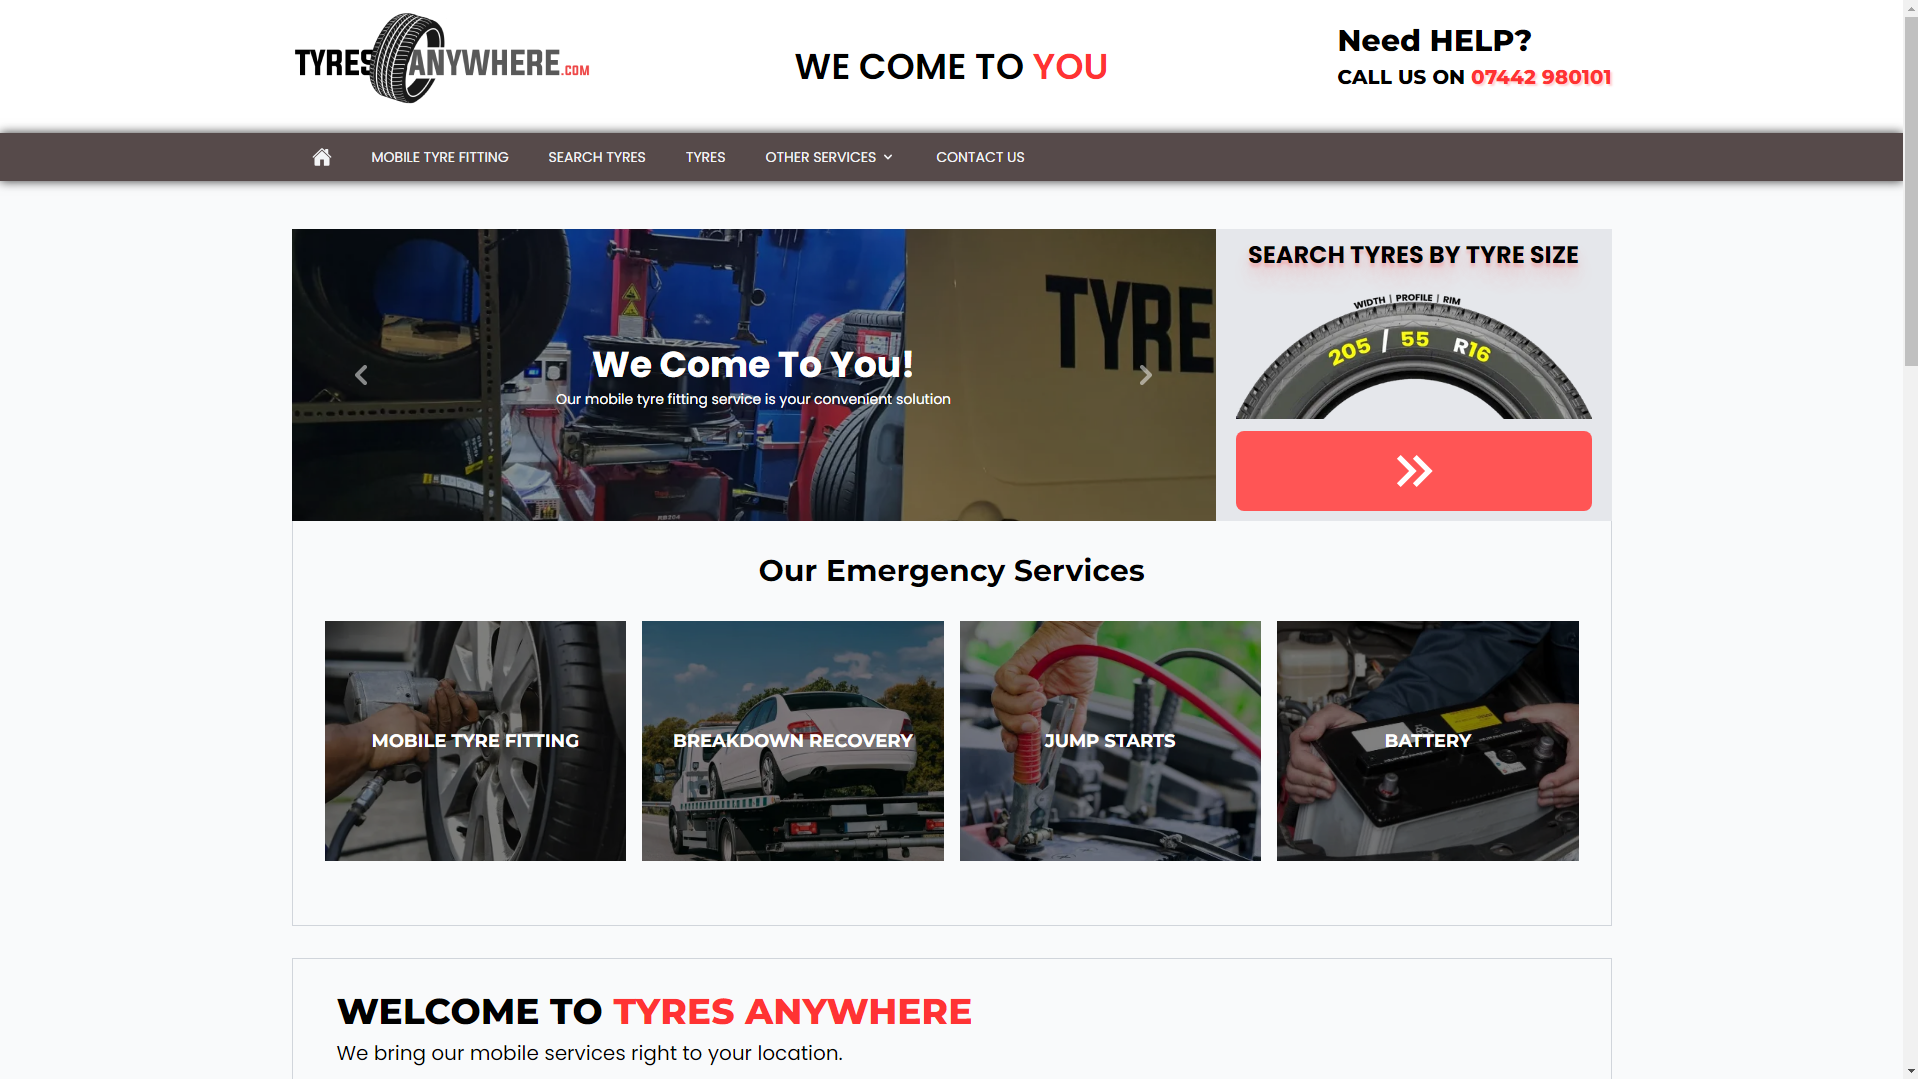 Home page of Tyres Anywhere